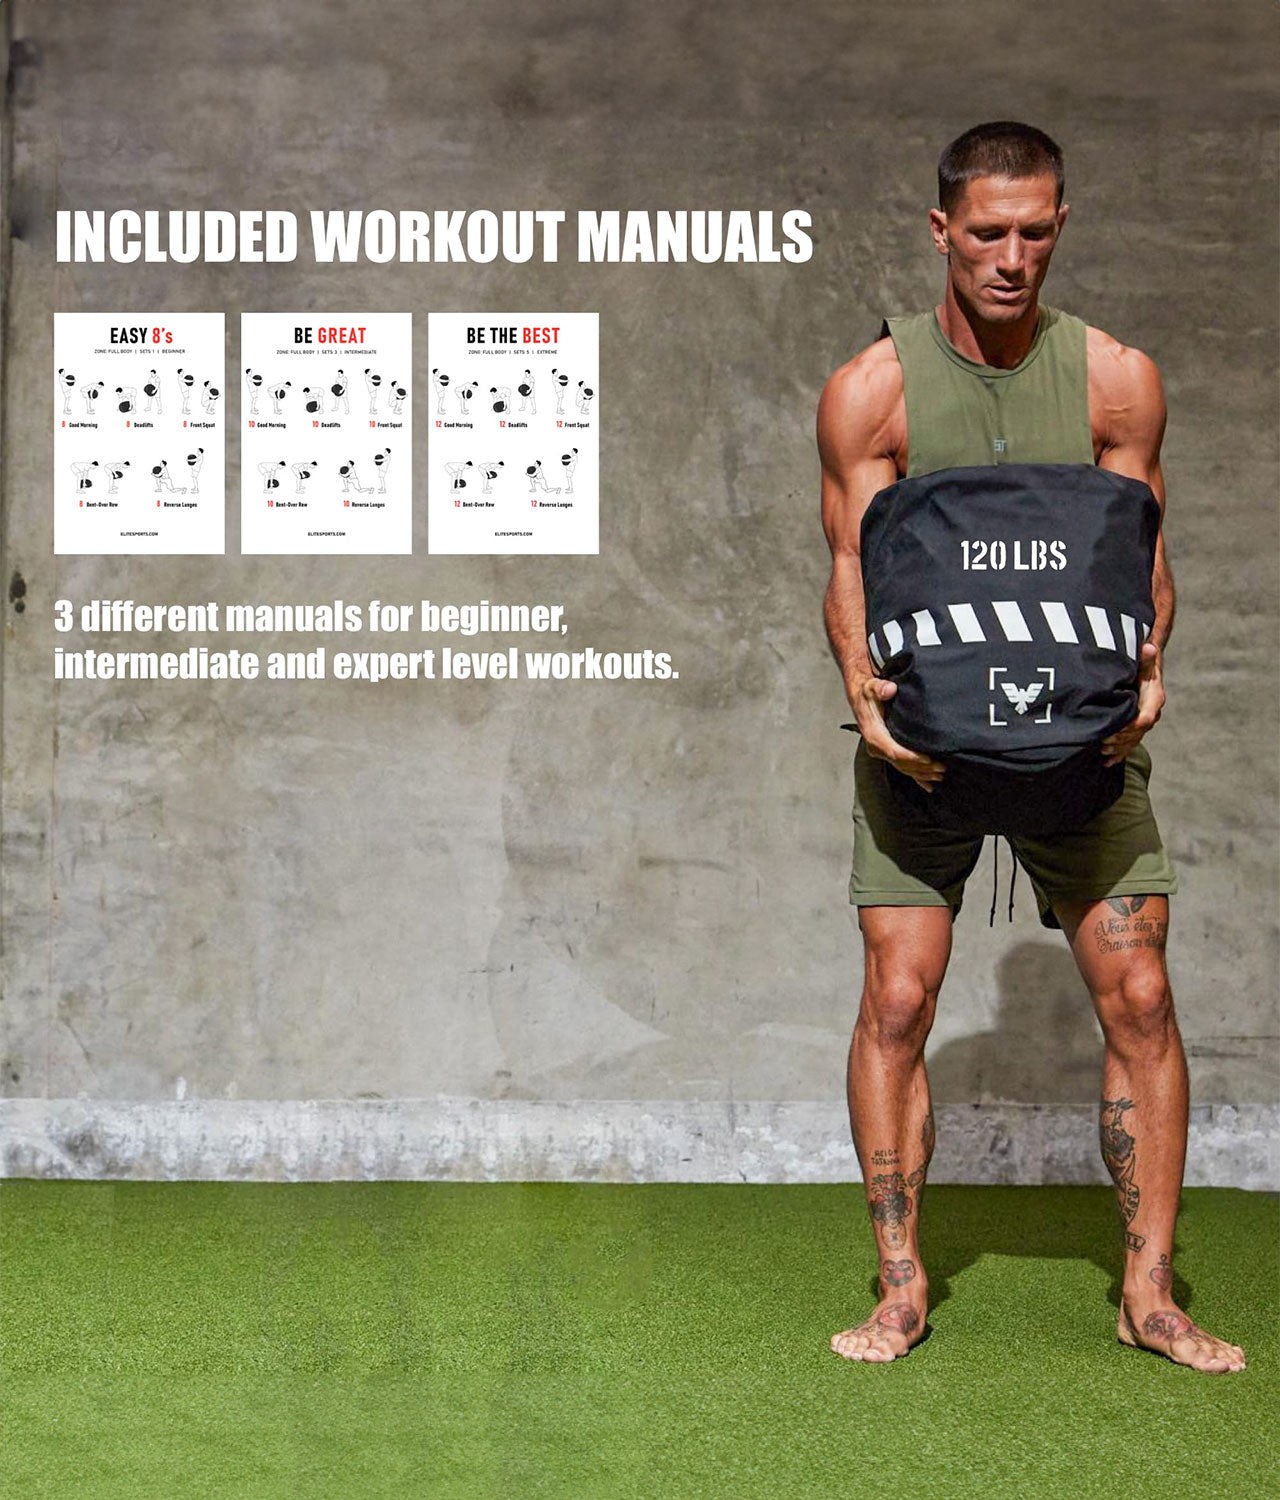 Elite Sports Core Round Workout Sandbag 35 lbs Included Workout Manuals